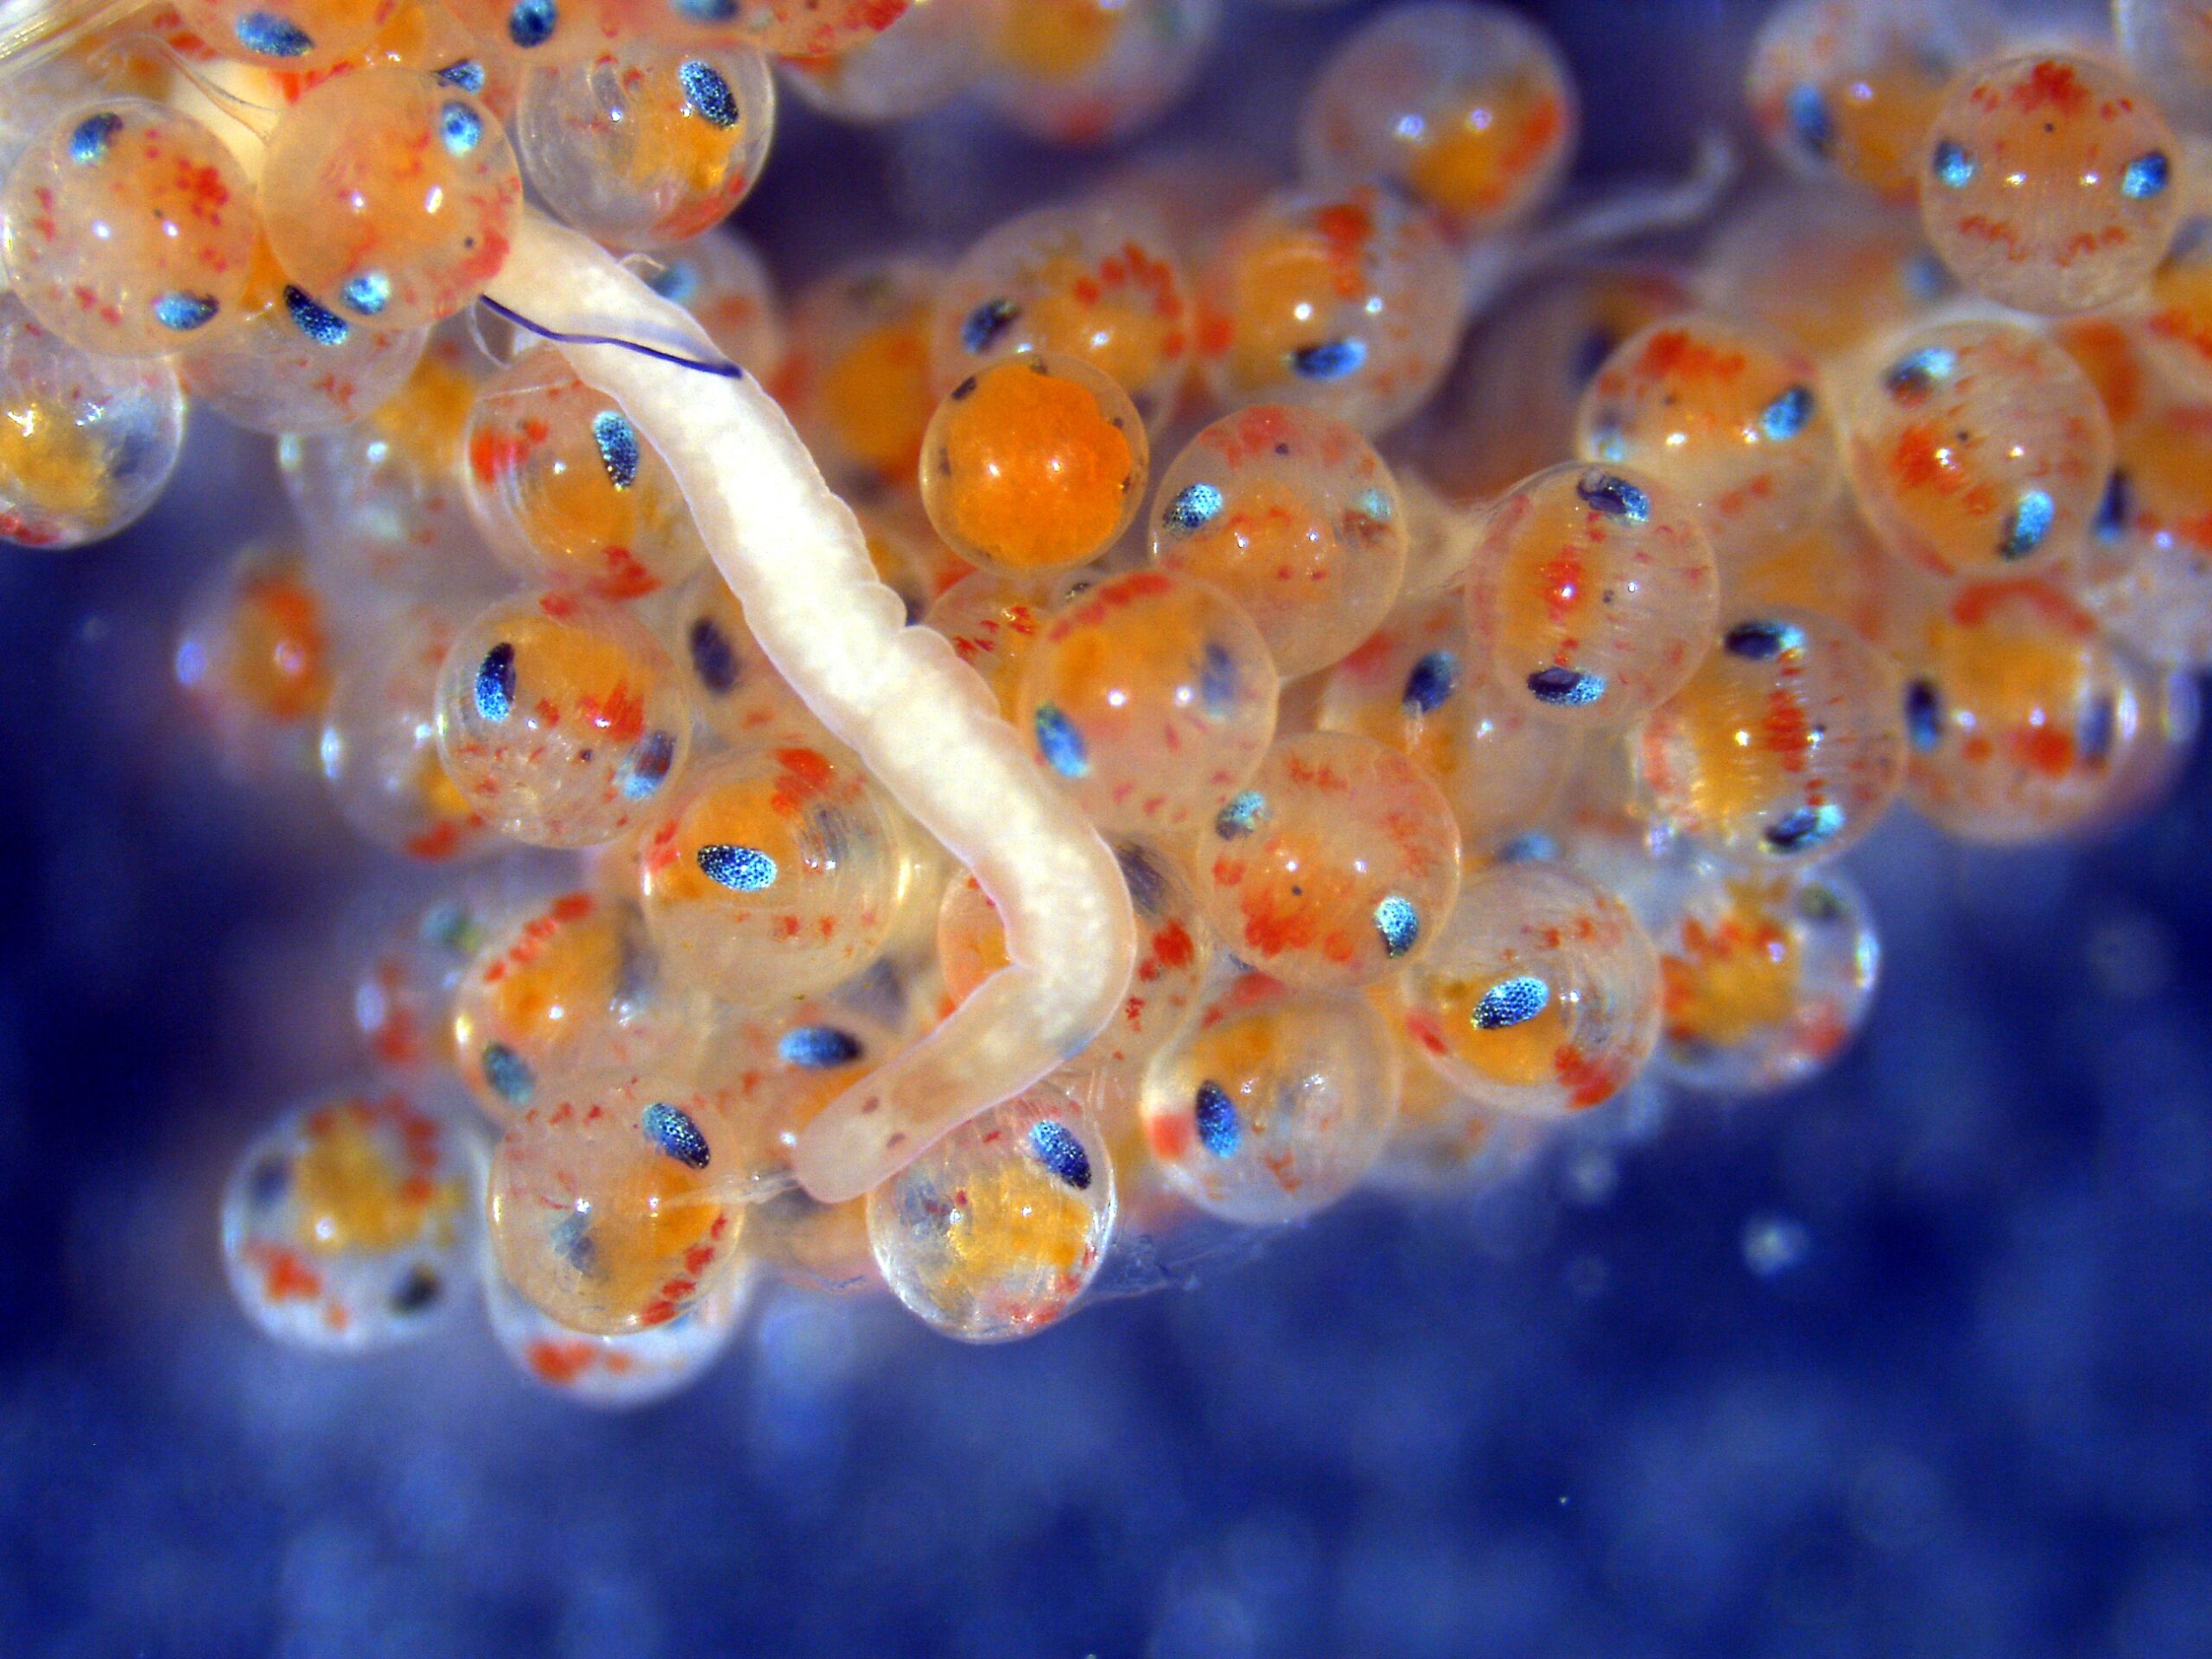 image: parasitic worm and lobster eggs.